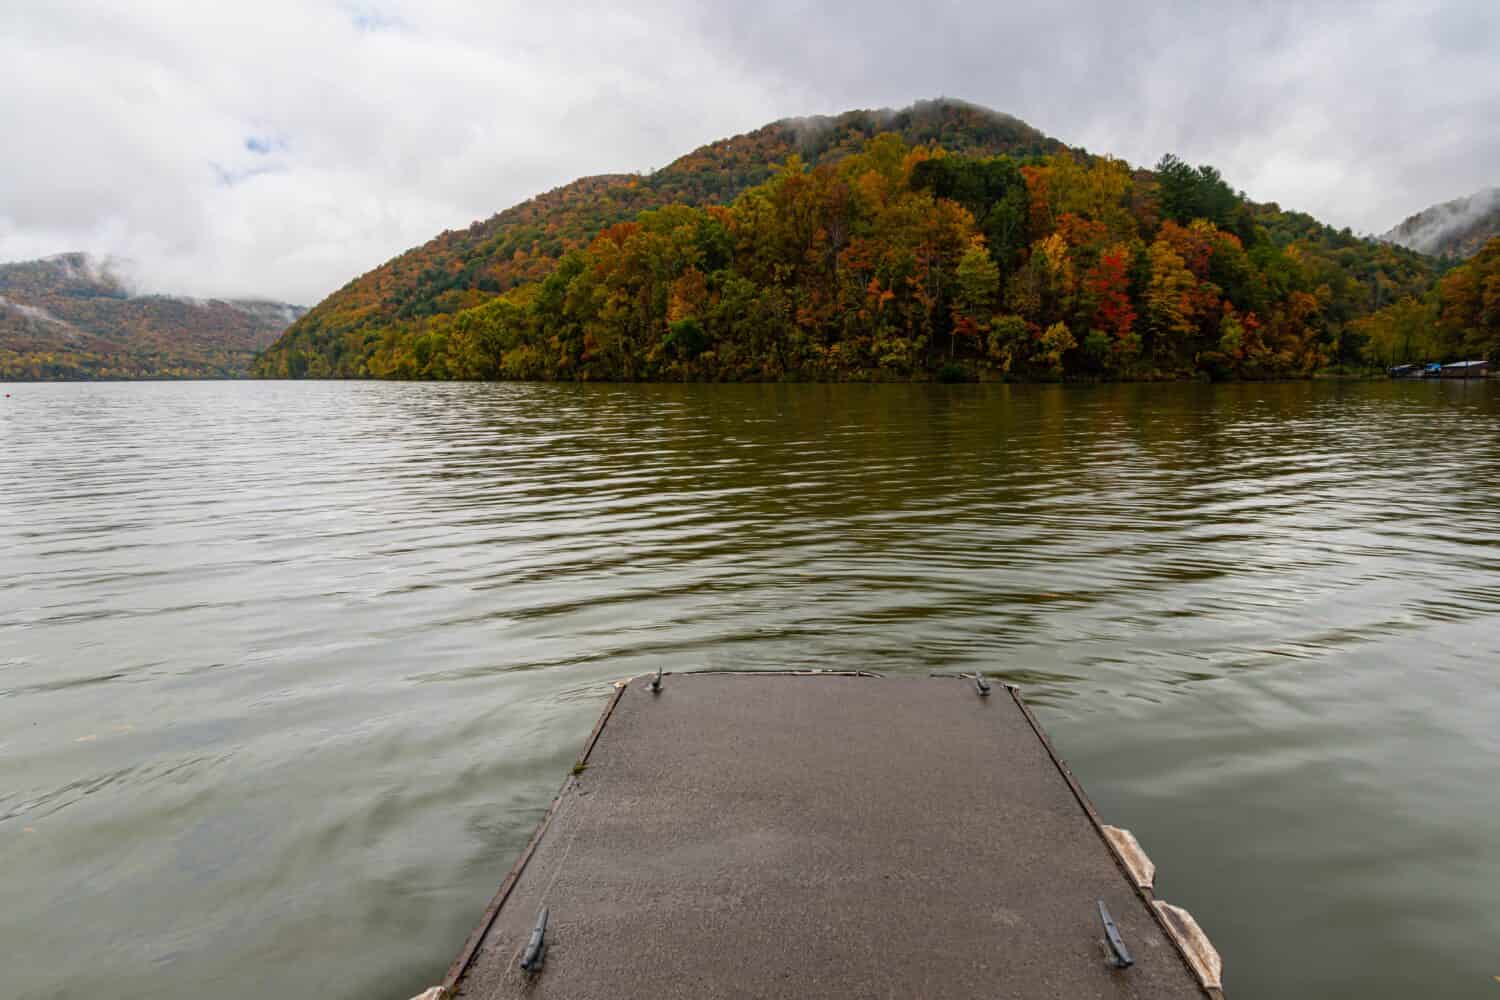 Fishing Pier On The Bluestone River Surrounded With Fall Foliage and Mountains, Bluestone State Park, West Virginia, USA